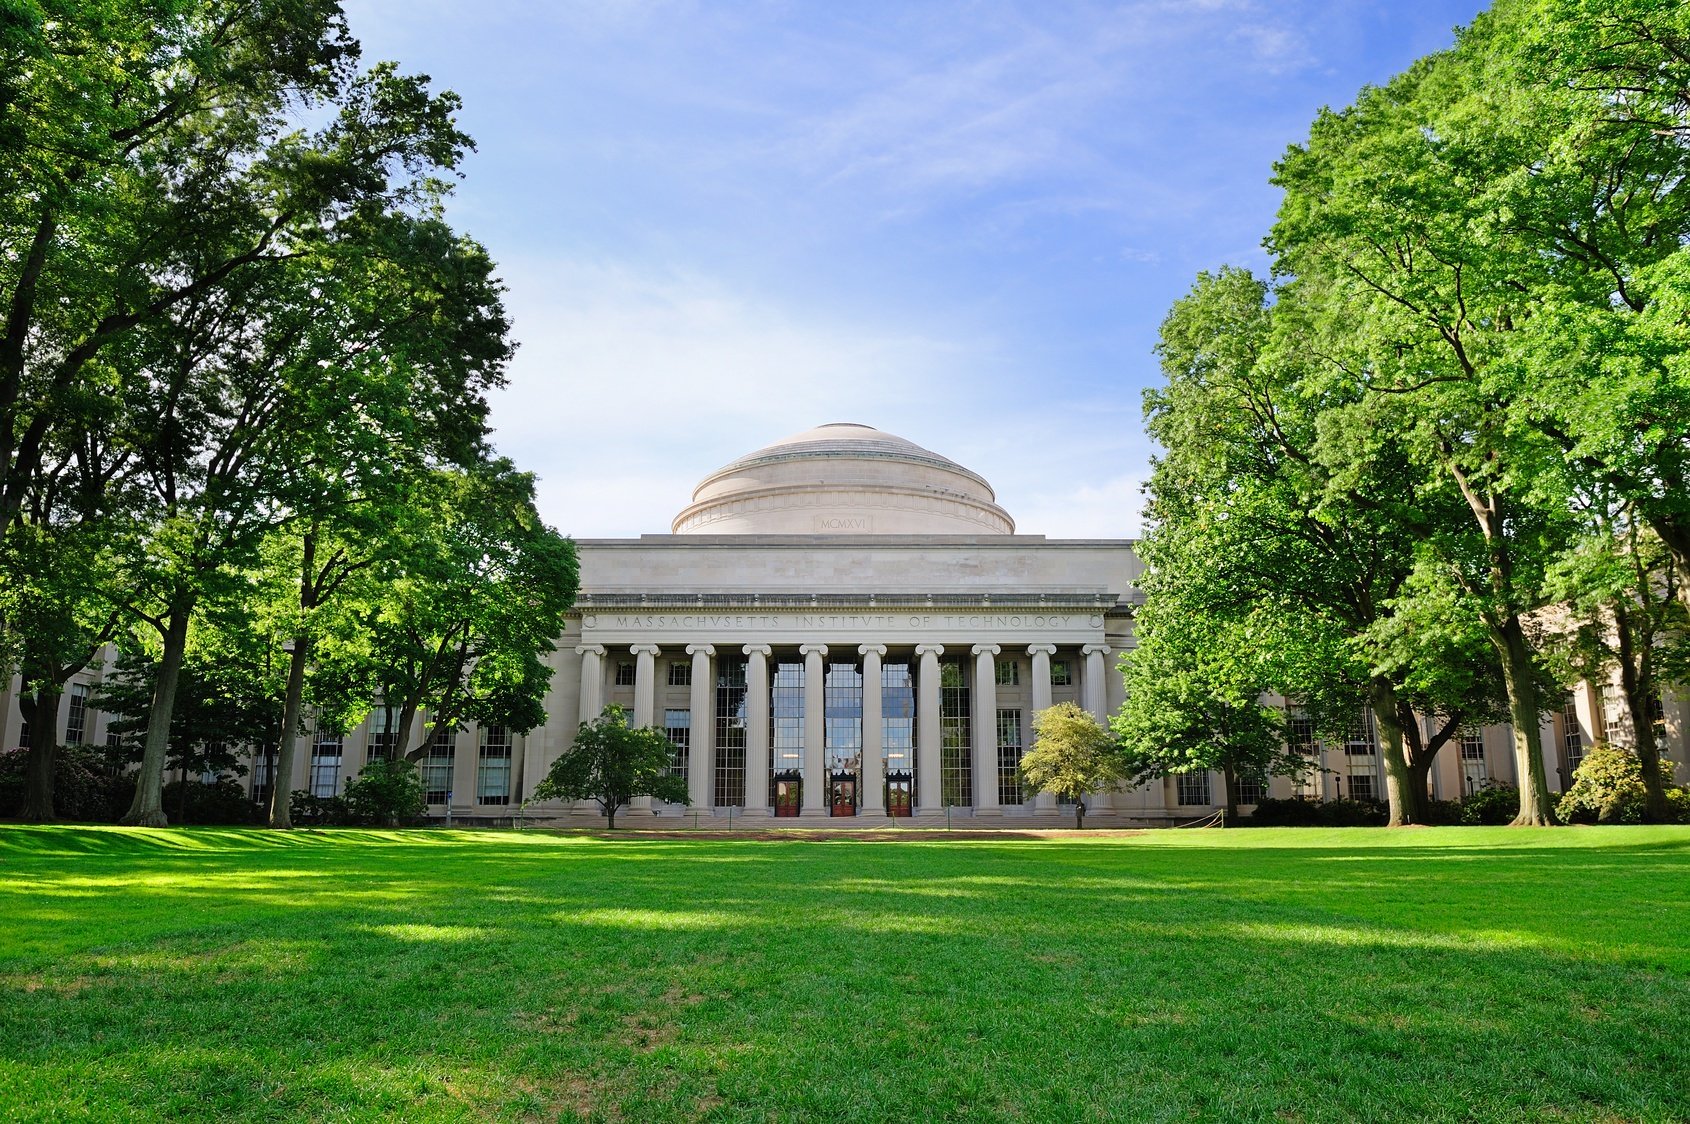 Why is MIT famous?